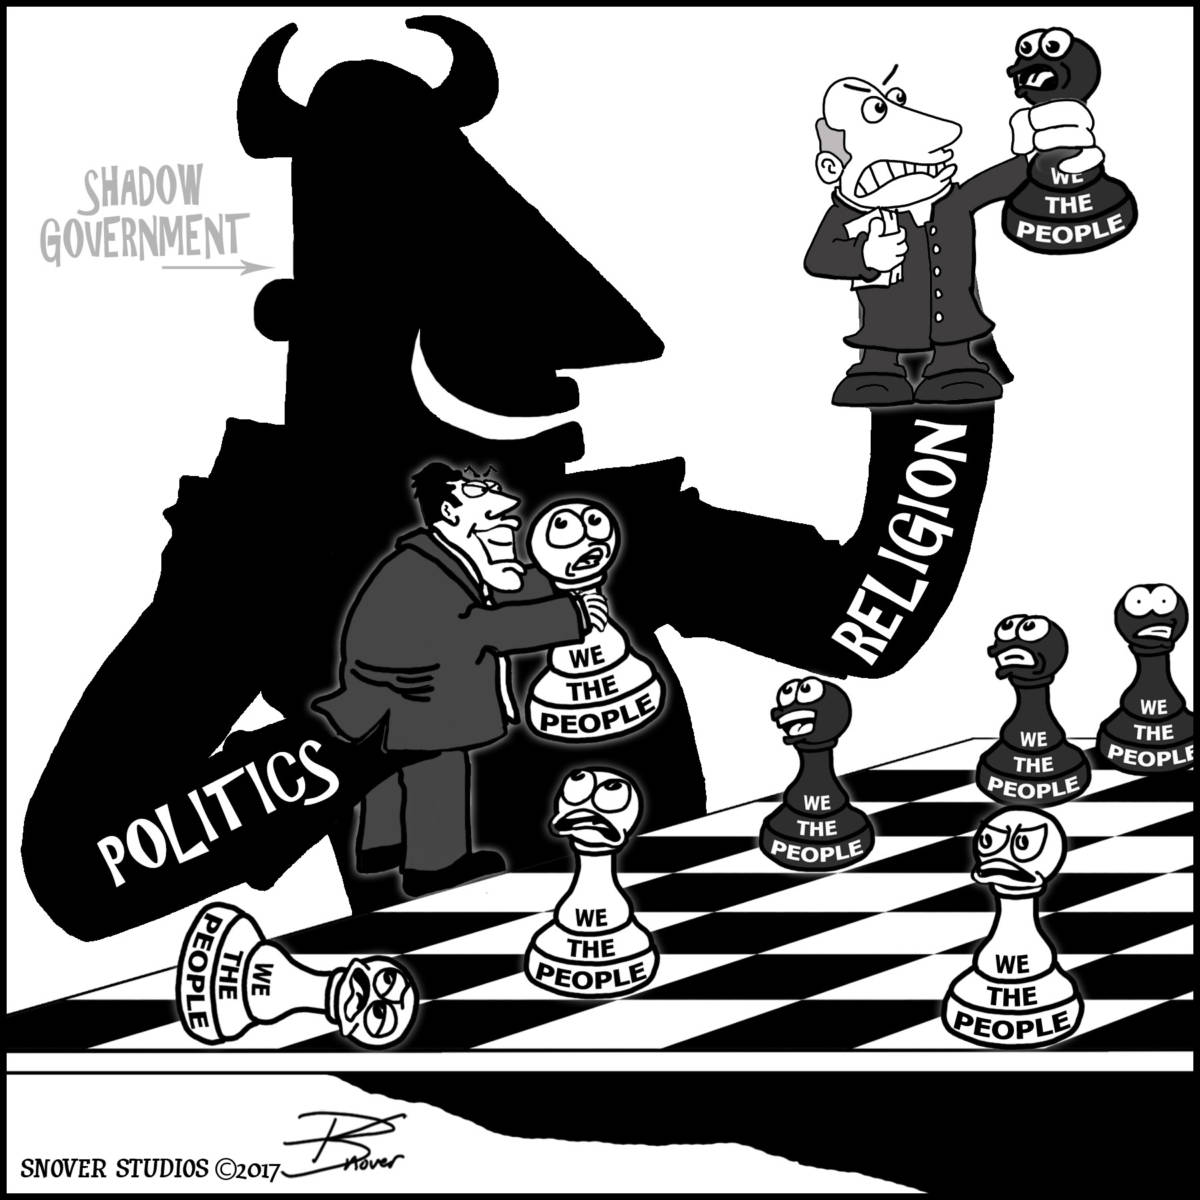 Cartoon: "Pawns in the Game" By Paul Snover, Skroder Comics